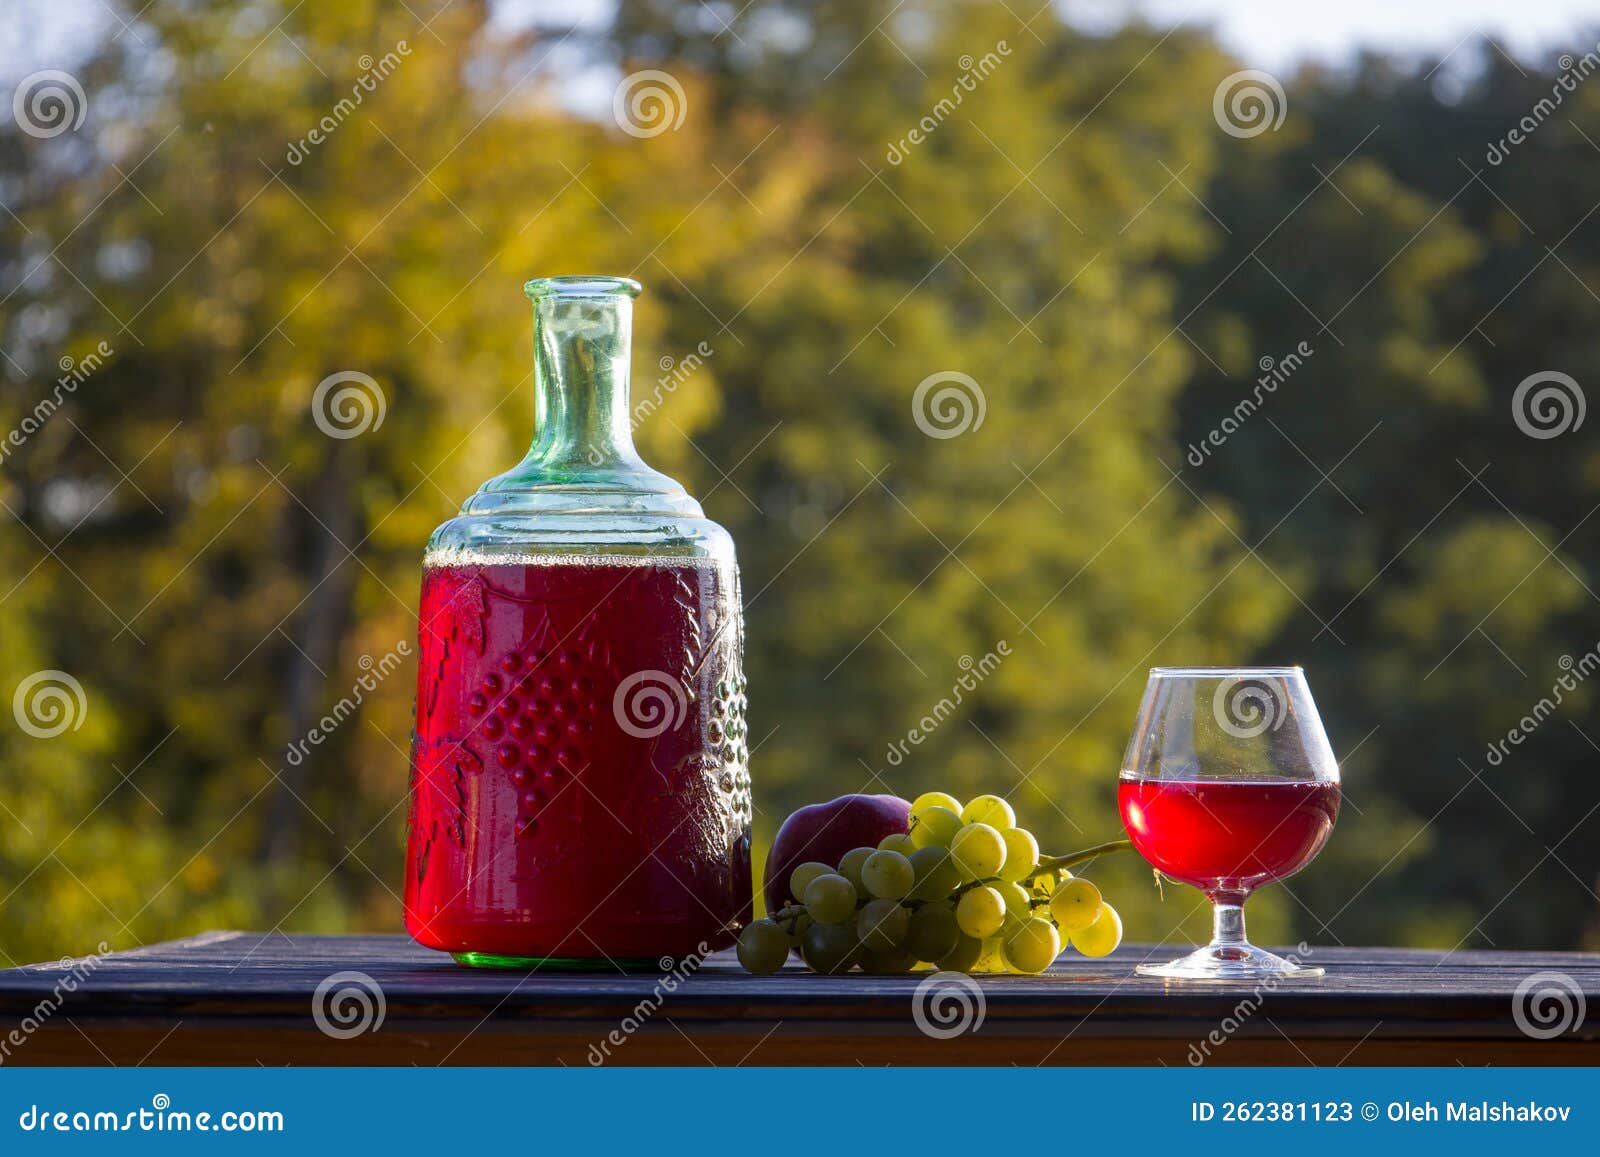 Red Wine in a Glass and Bottle. Blurred Background. Stock Image - Image ...